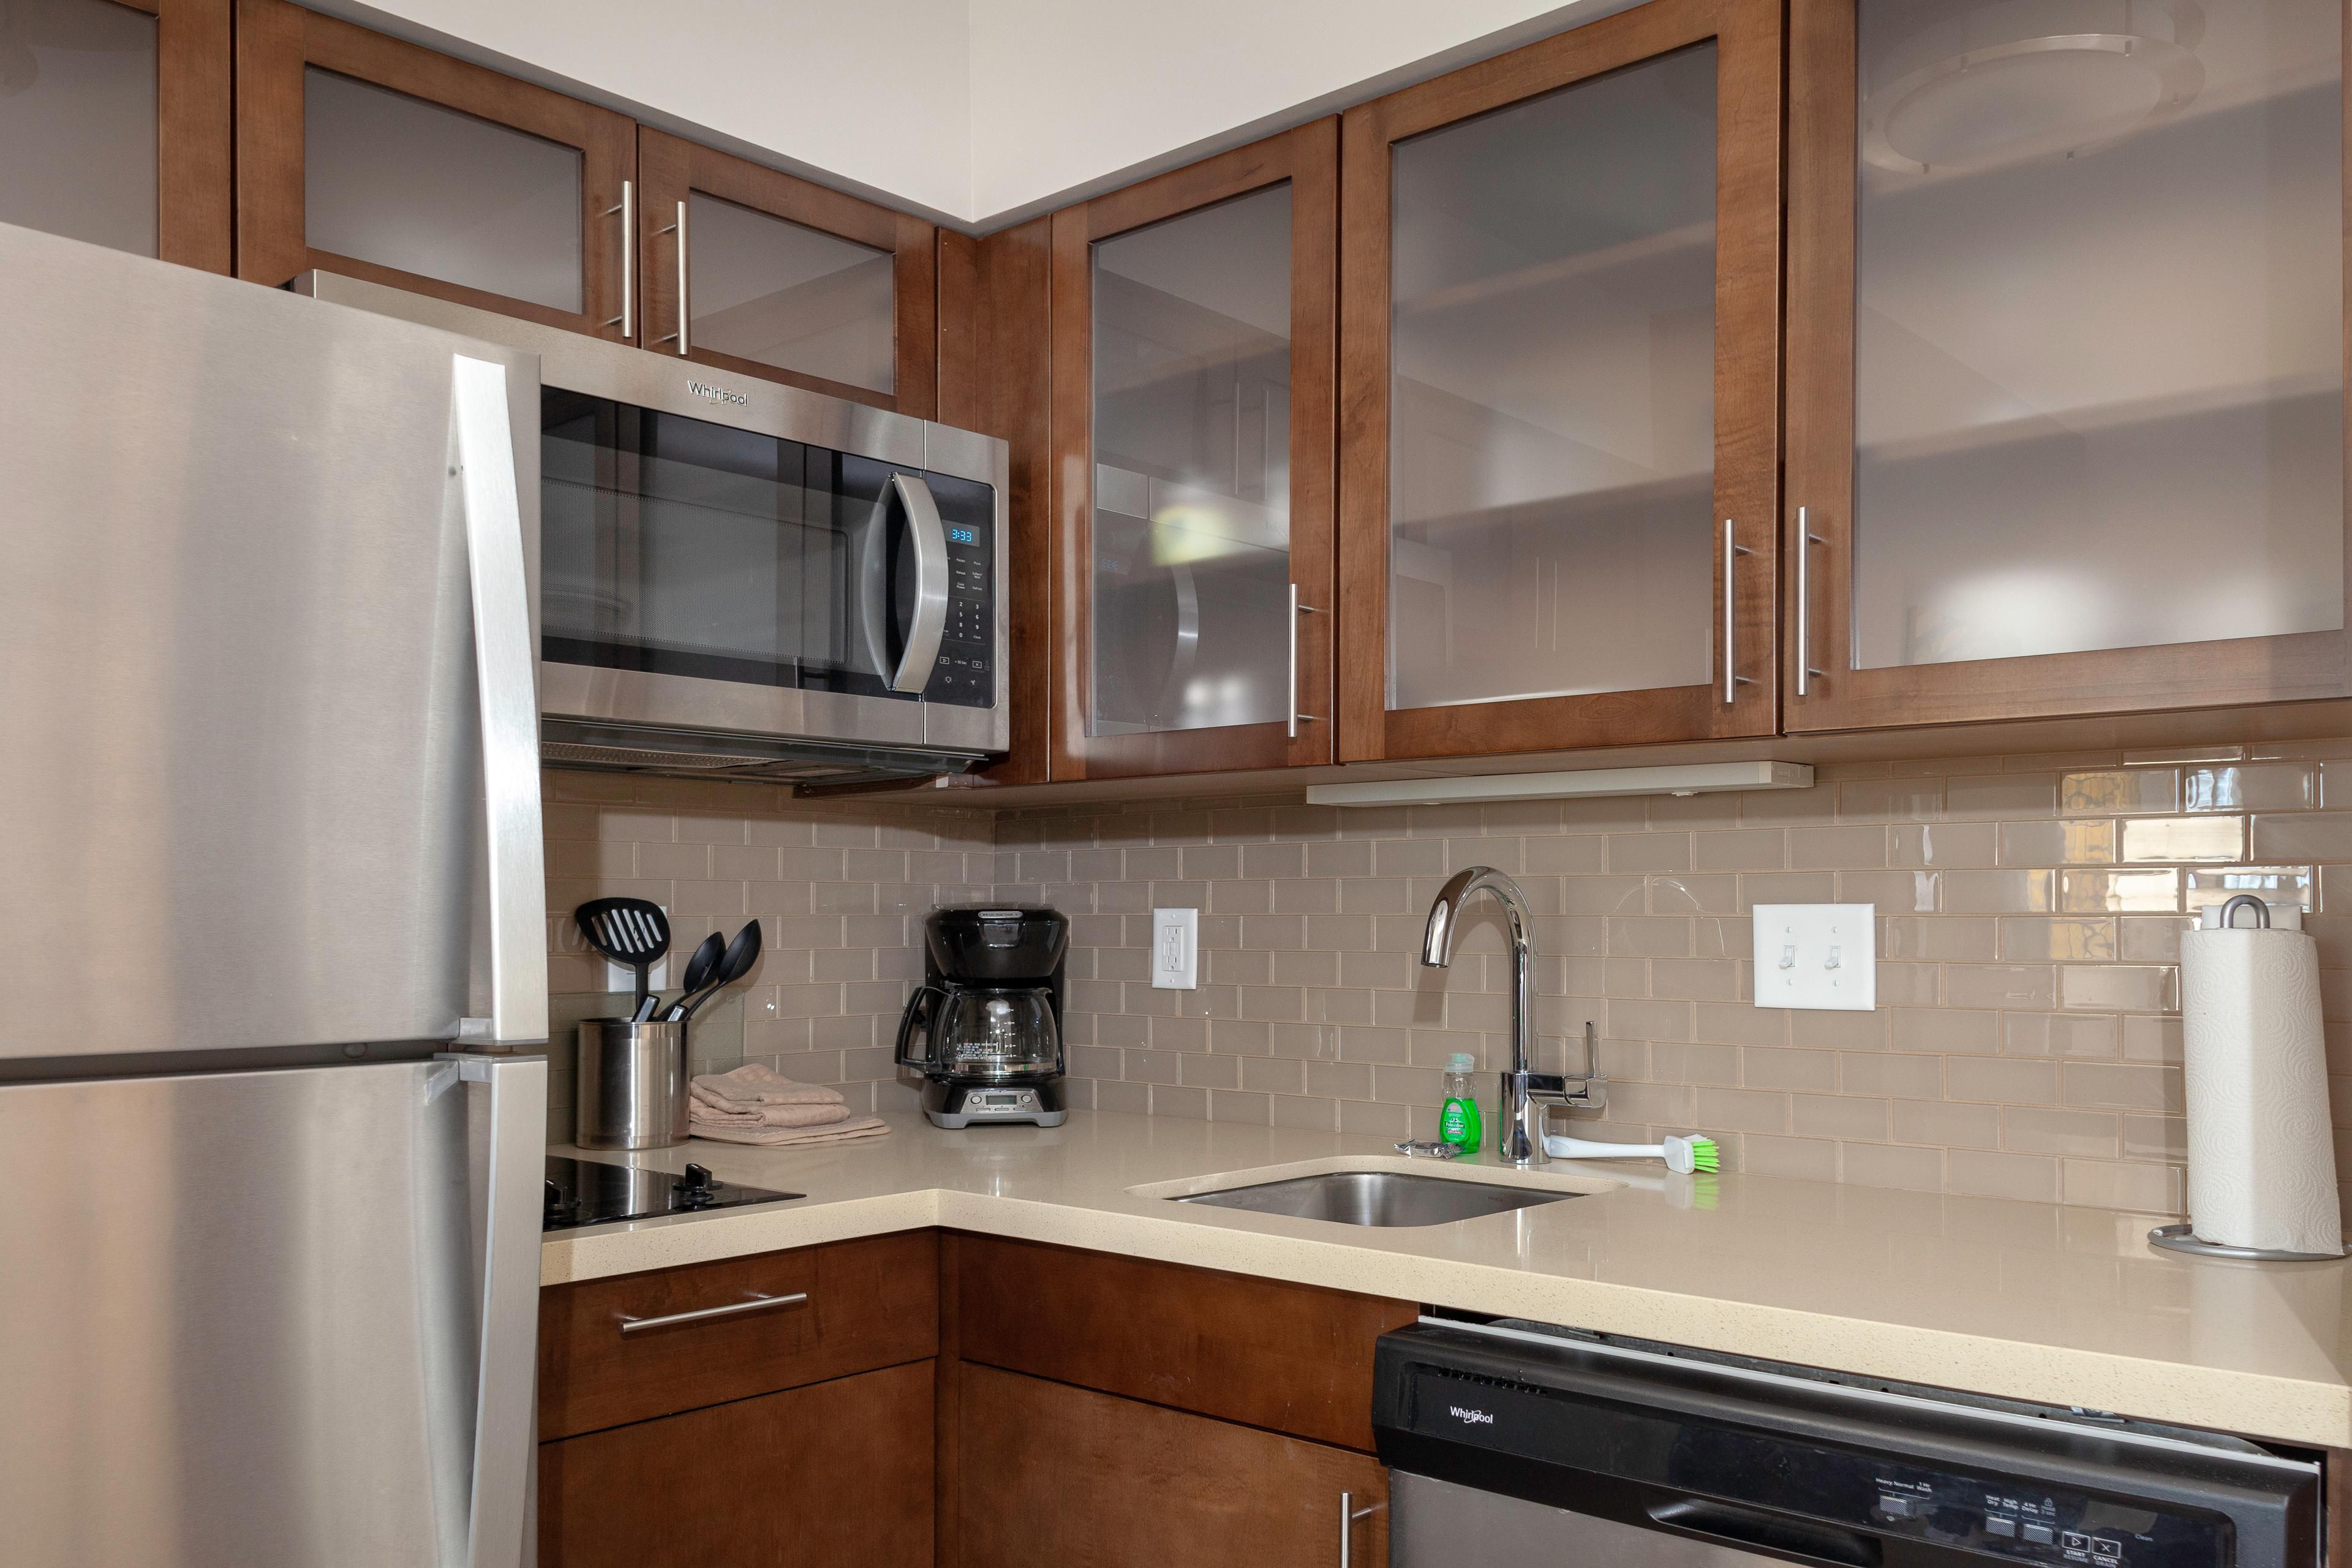 Each kitchen has table service for 4 and additional items to help make you feel right at home.   Contact the front desk to learn more and to reserve your suite.  